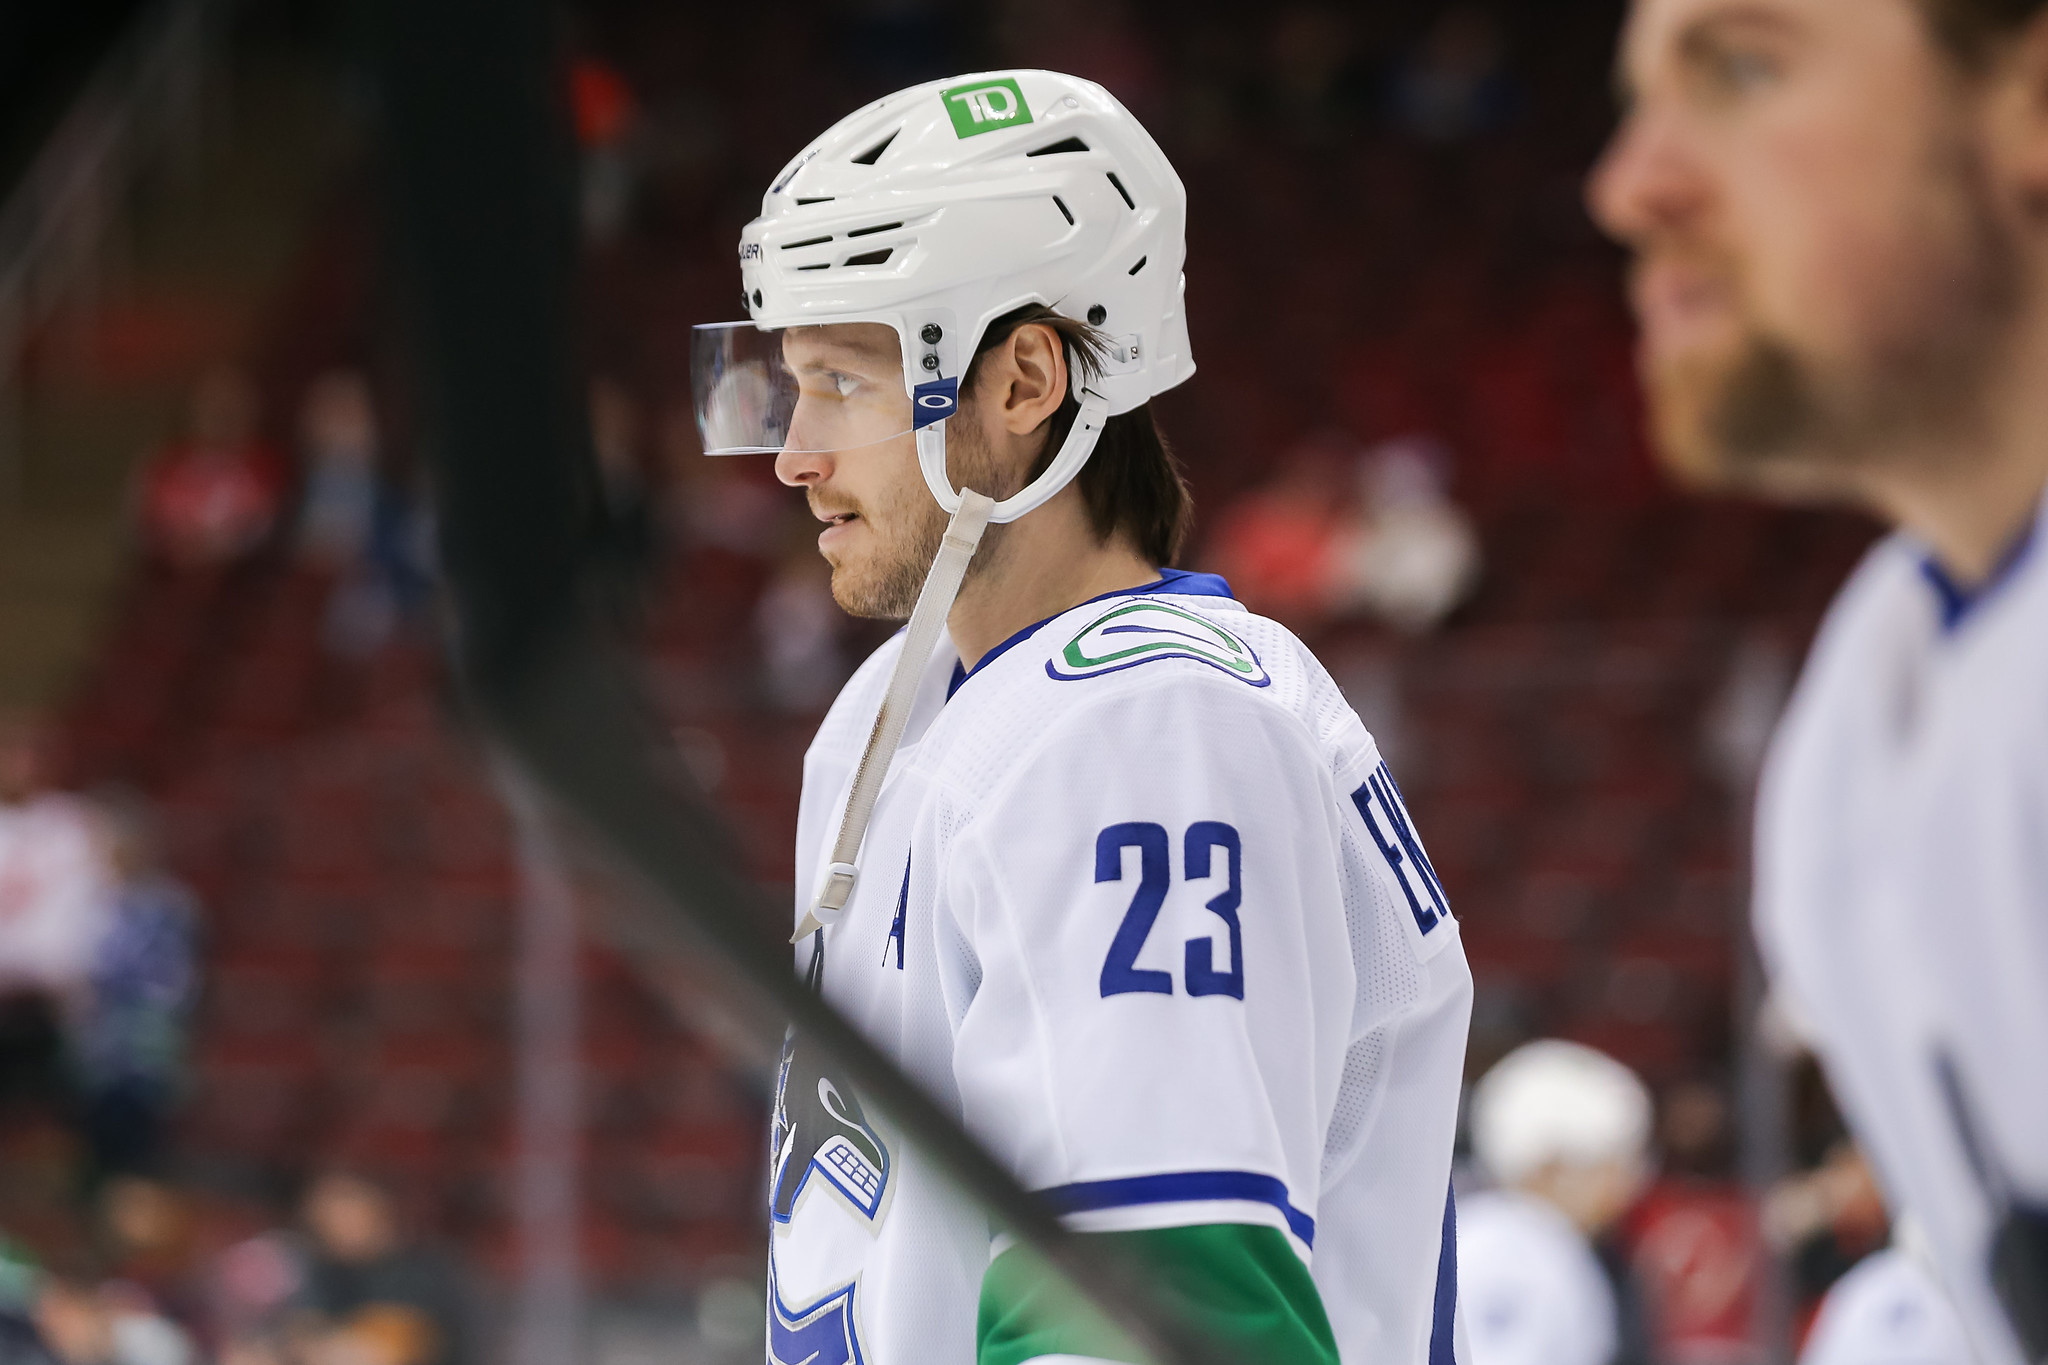 Canucks Need to Trade either Ekman-Larsson or Myers This Offseason